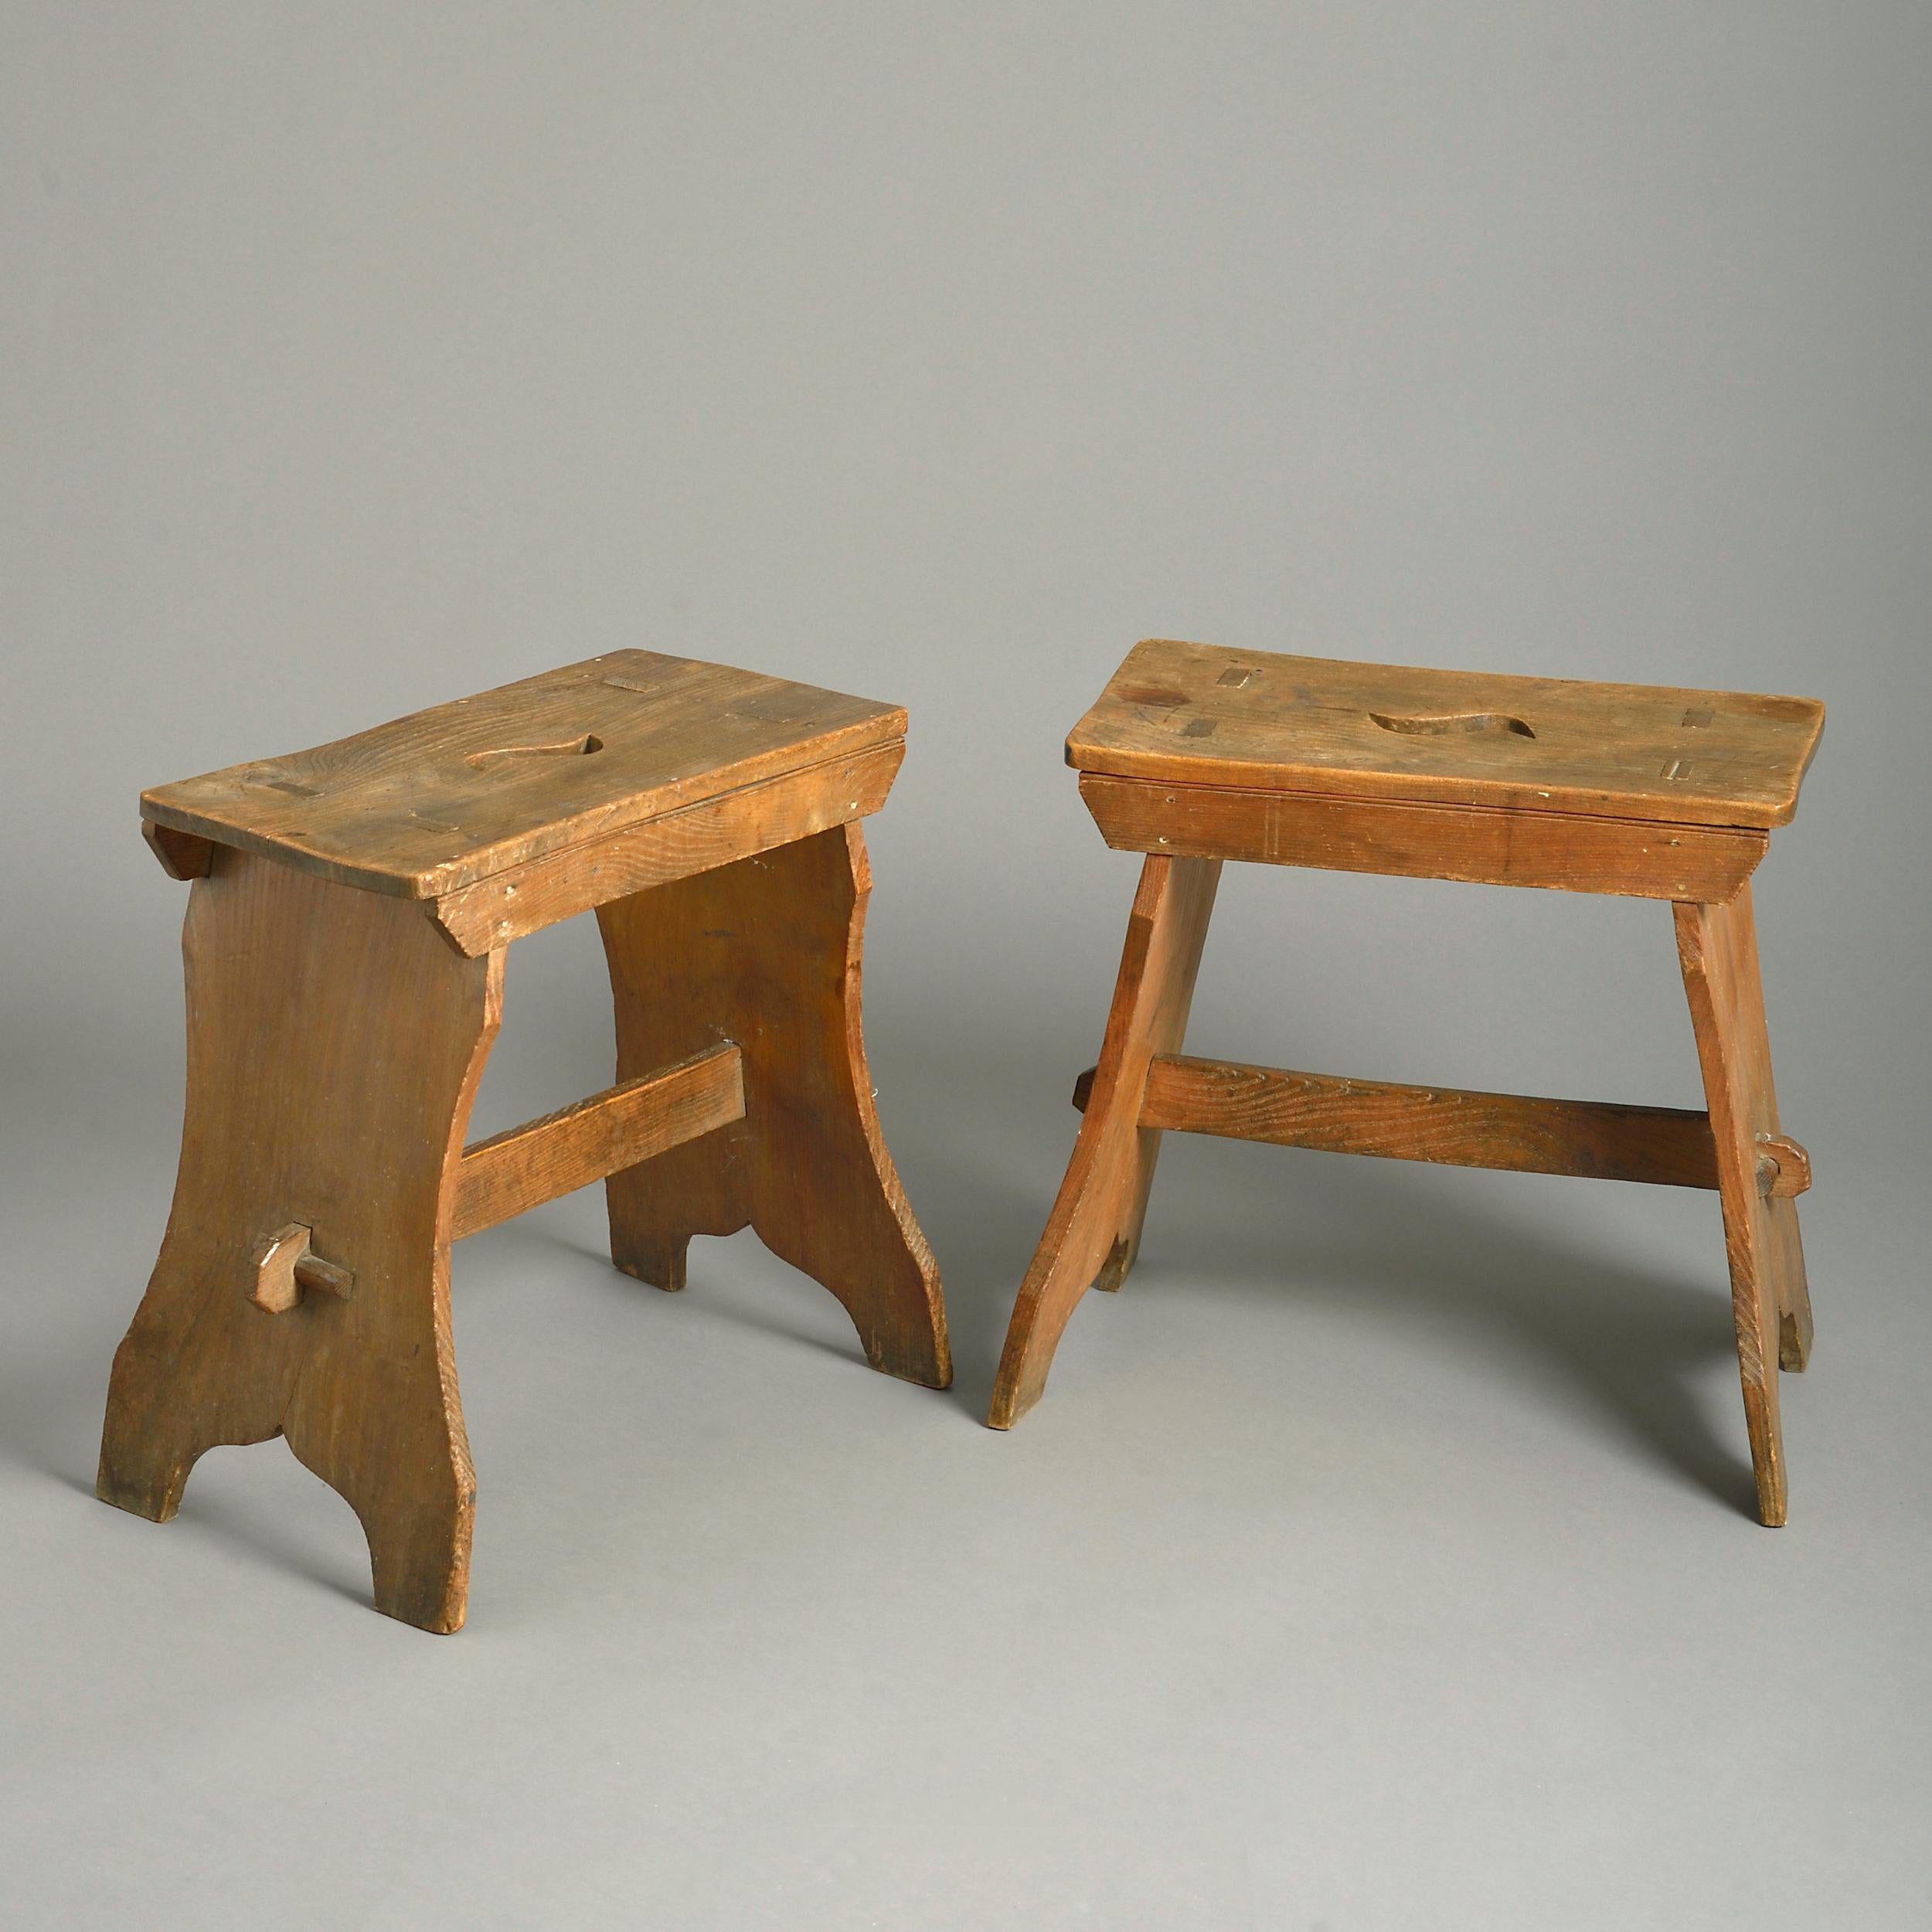 A pair of vernacular chestnut stools, circa 1830.

Provenance: from a non-conformist chapel in the West Midlands built in 1832.